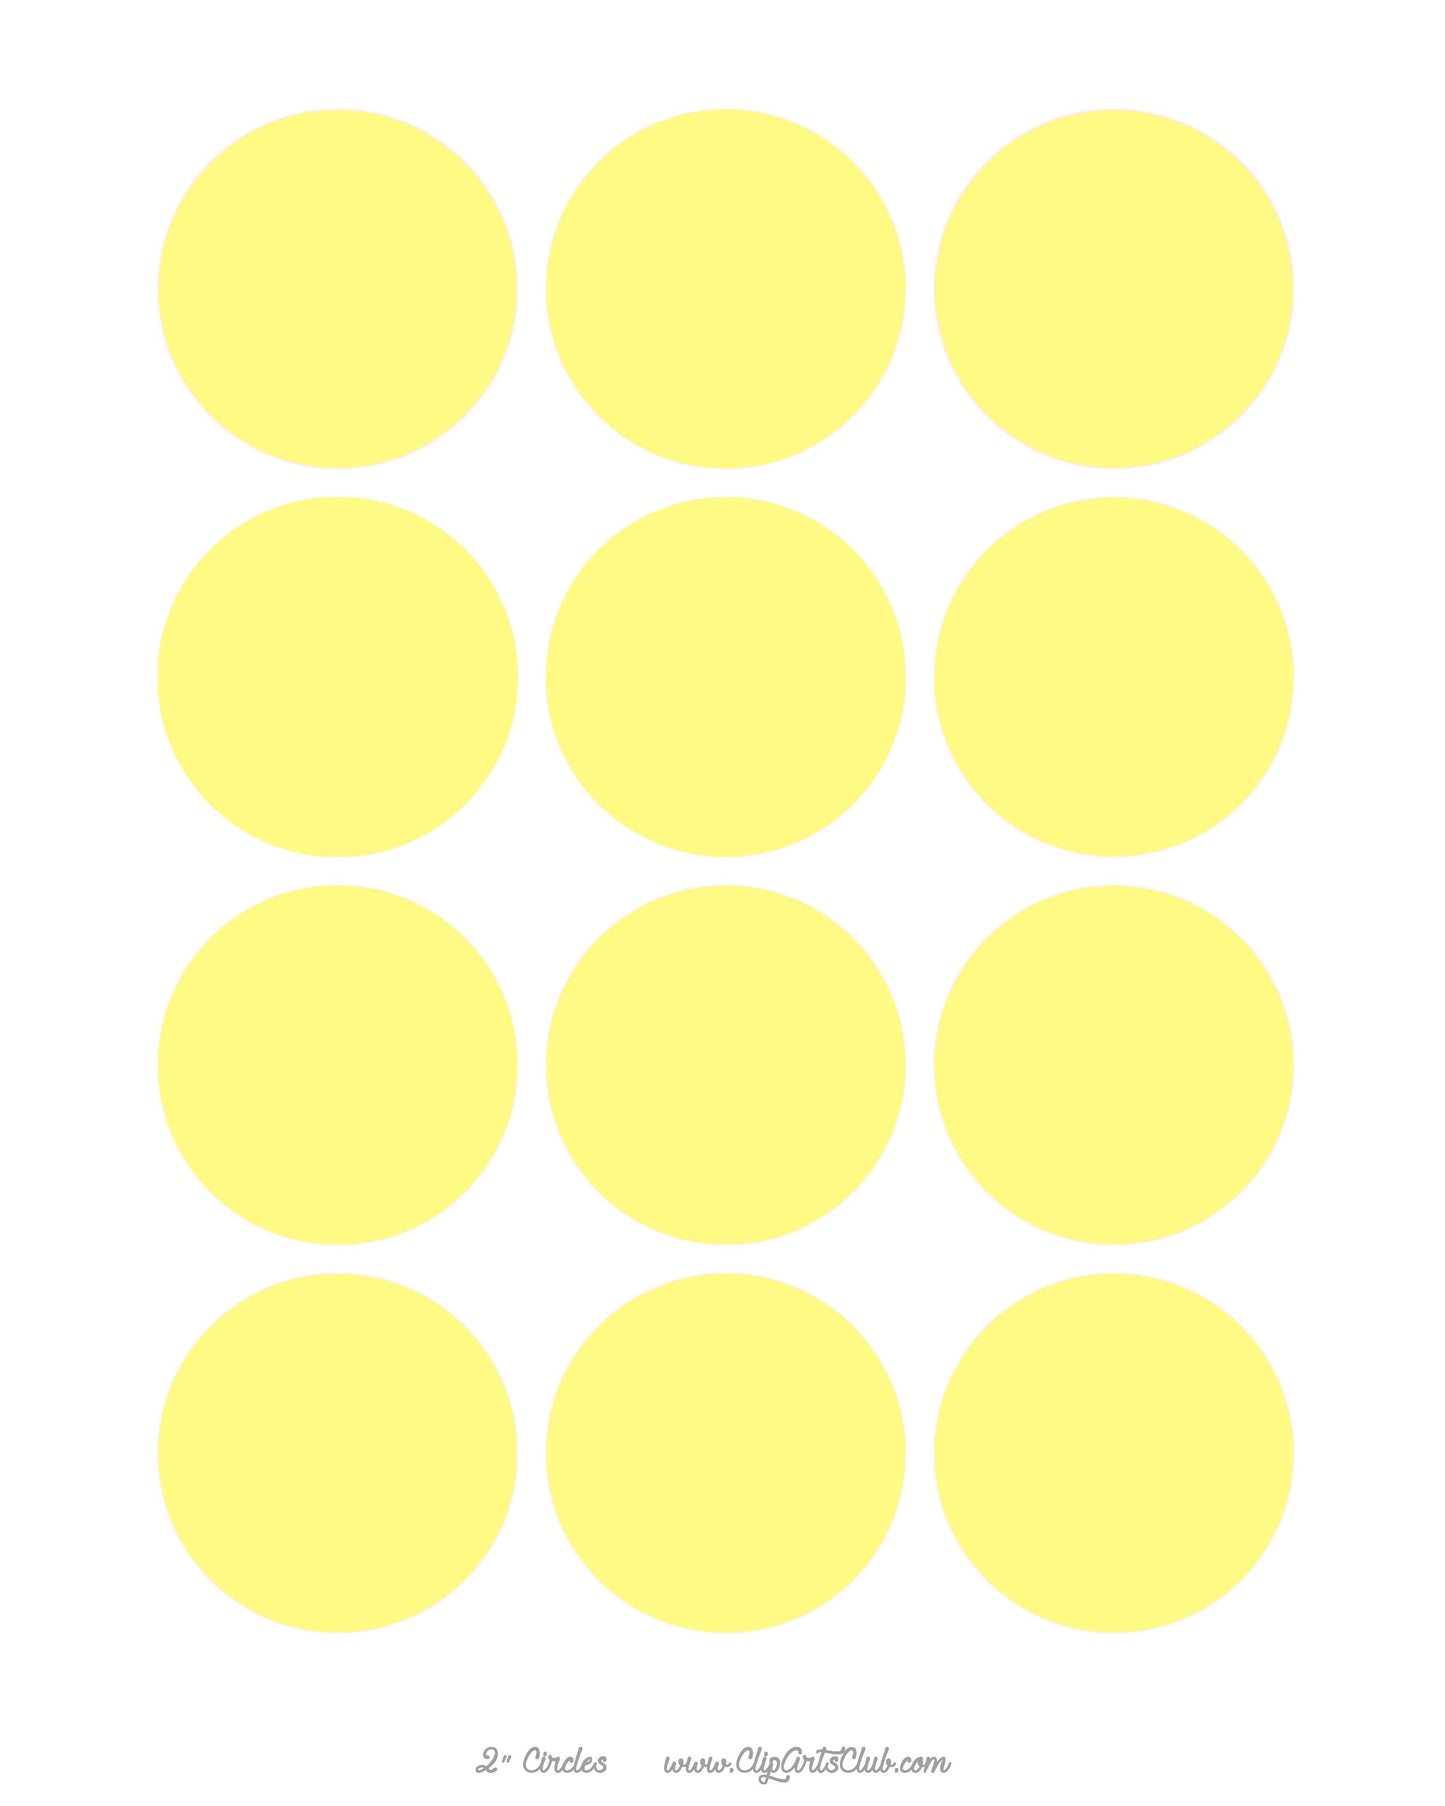 6 Shades of Yellow DIY Collage Sheets Blank 2" Circle Backgrounds Bundle - 7 Separate Sheets.